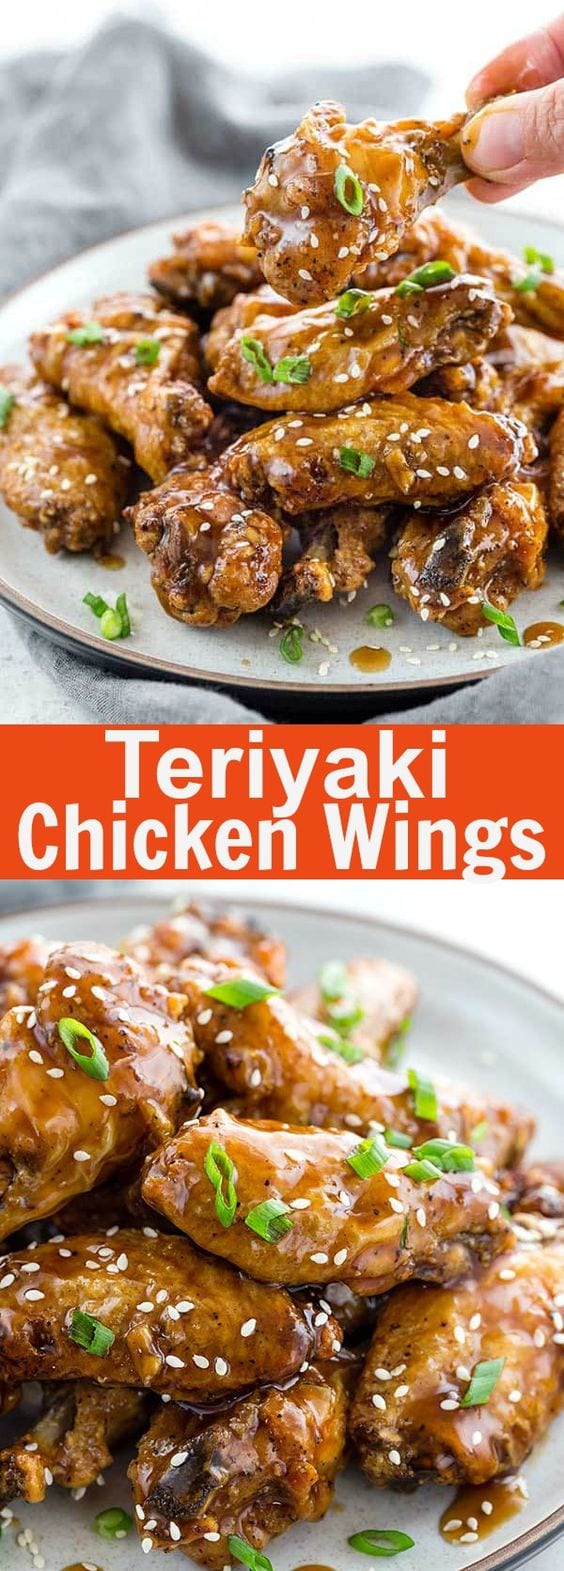 Teriyaki Chicken Wings - baked chicken wings with sticky sweet and savory teriyaki sauce. These wings are crowd pleaser and perfect for busy weeknights | rasamalaysia.com